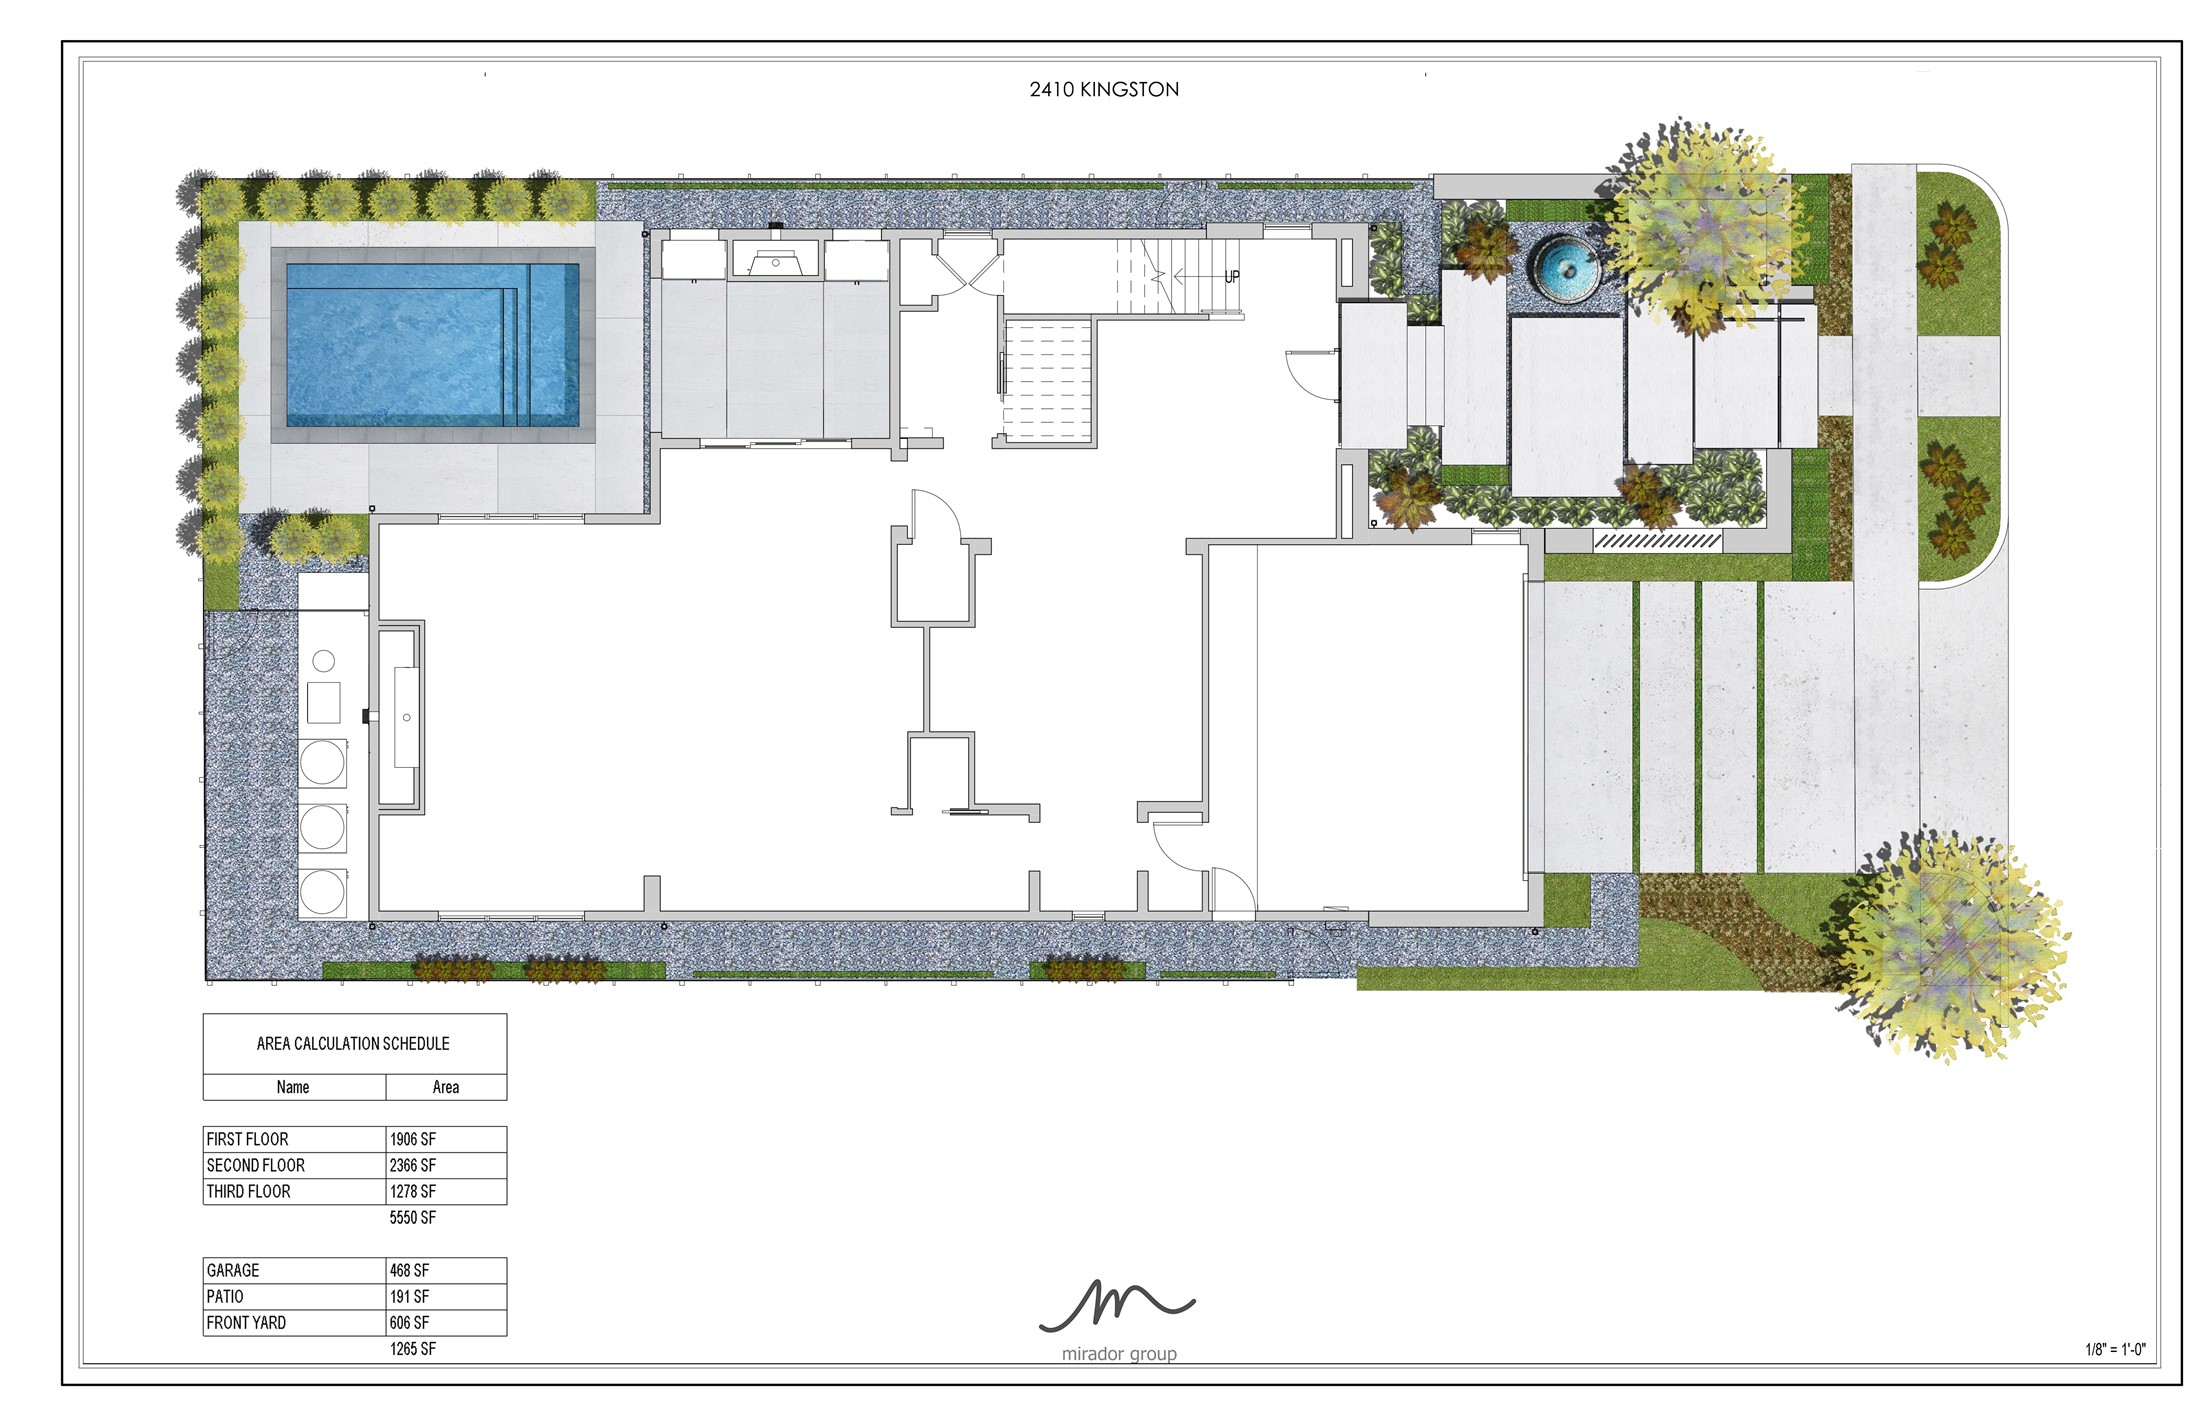 Exterior Plan w/ Pool Rendering. Pool is not installed or included